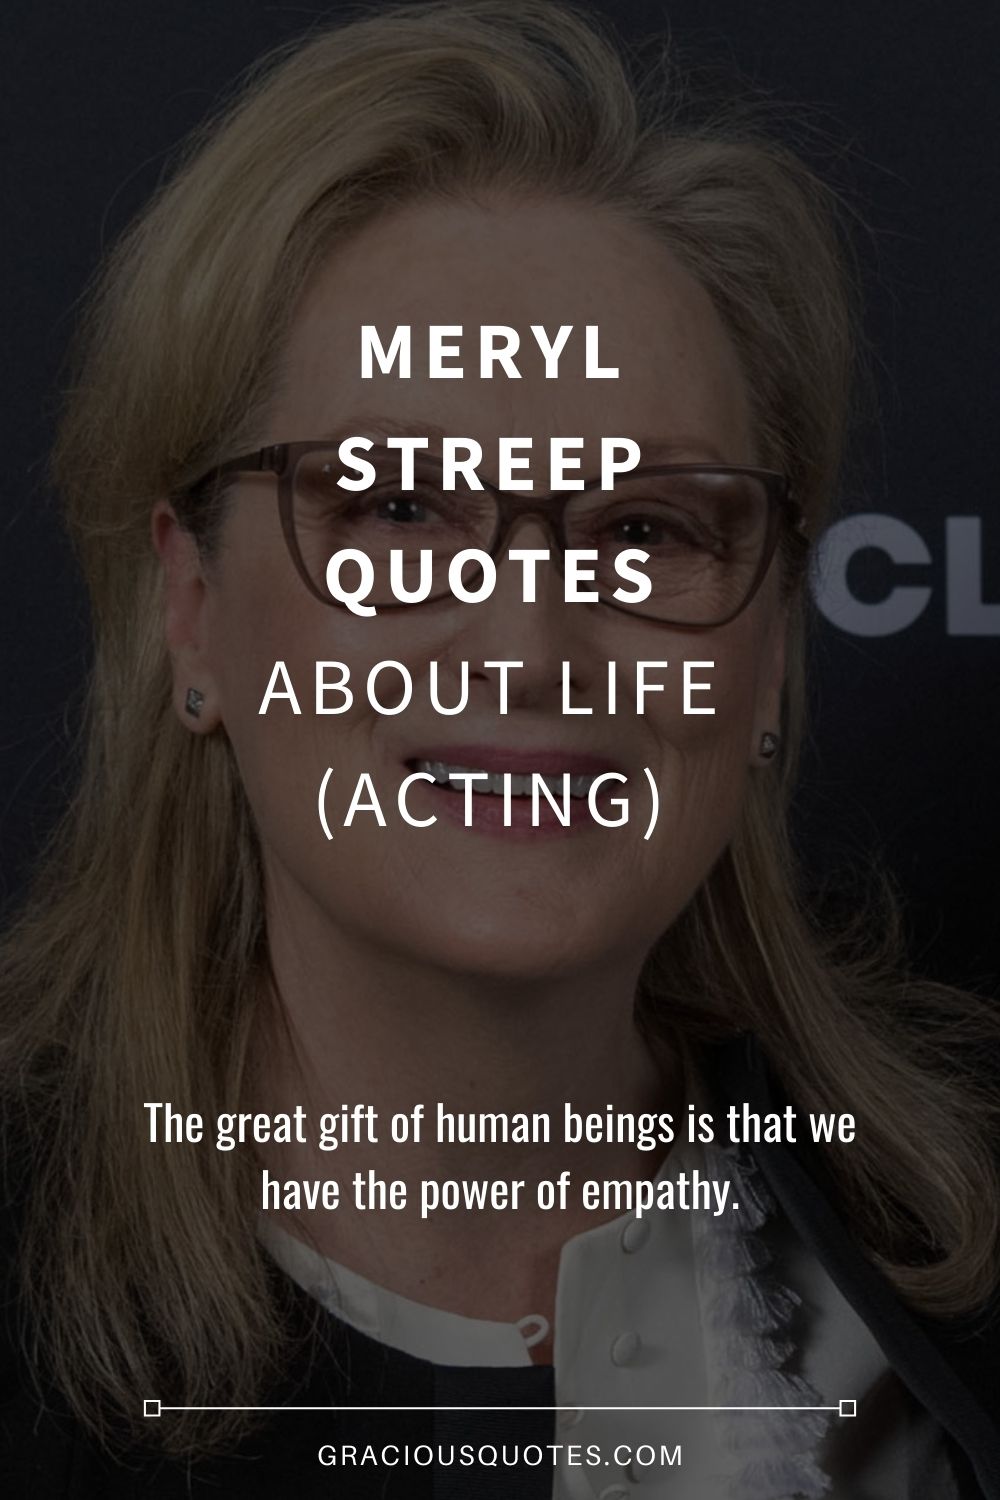 Meryl Streep Quotes About Life (ACTING) - Gracious Quotes